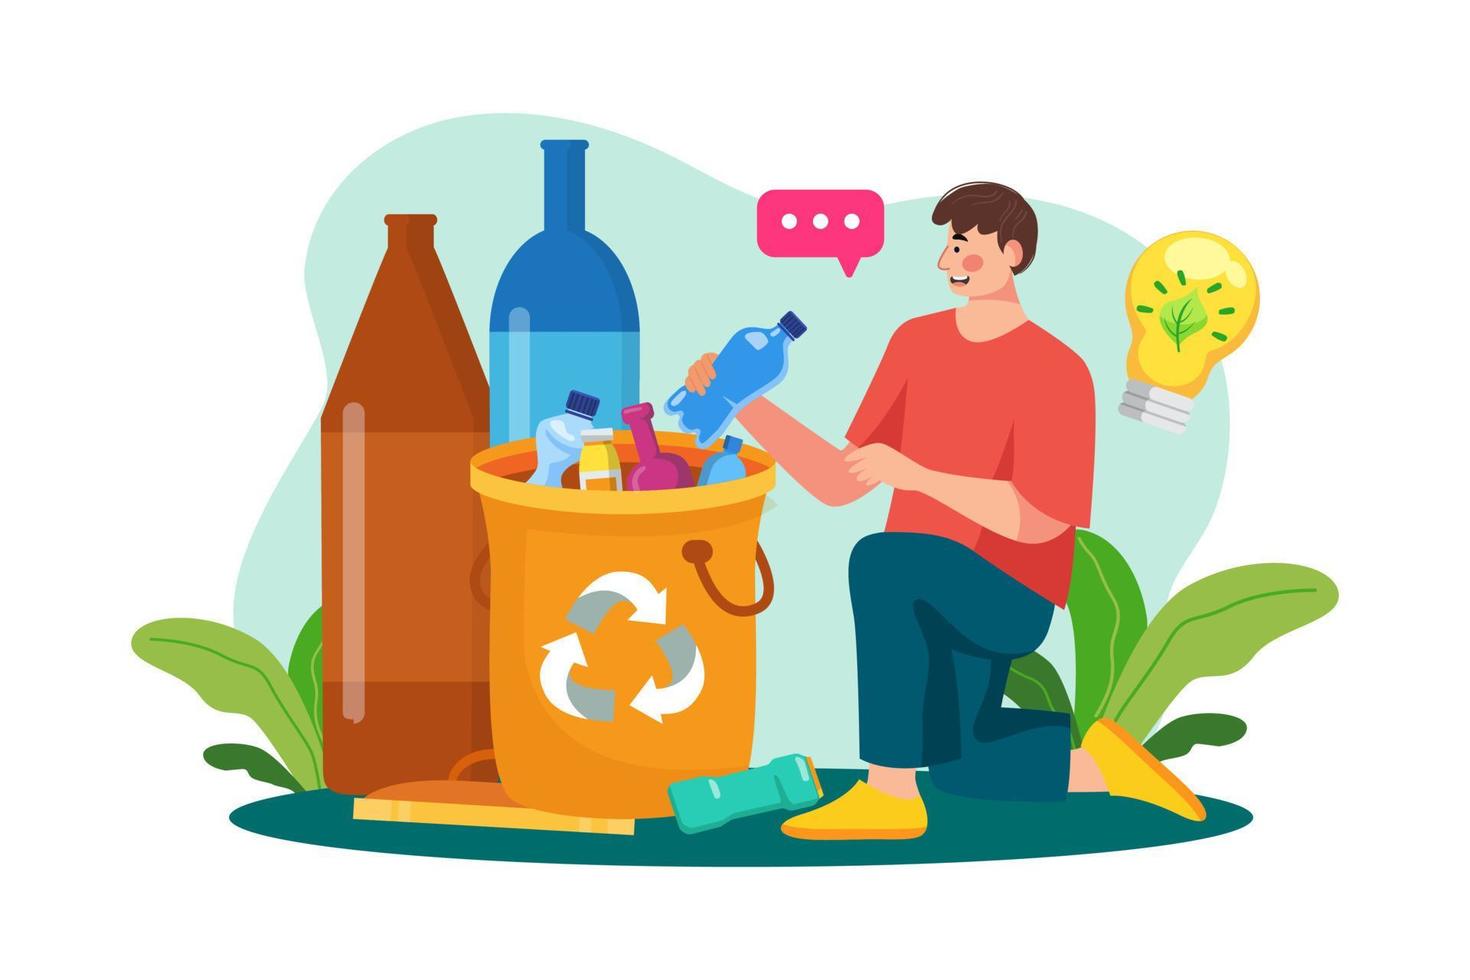 Bottle waste recycling Illustration concept on white background vector